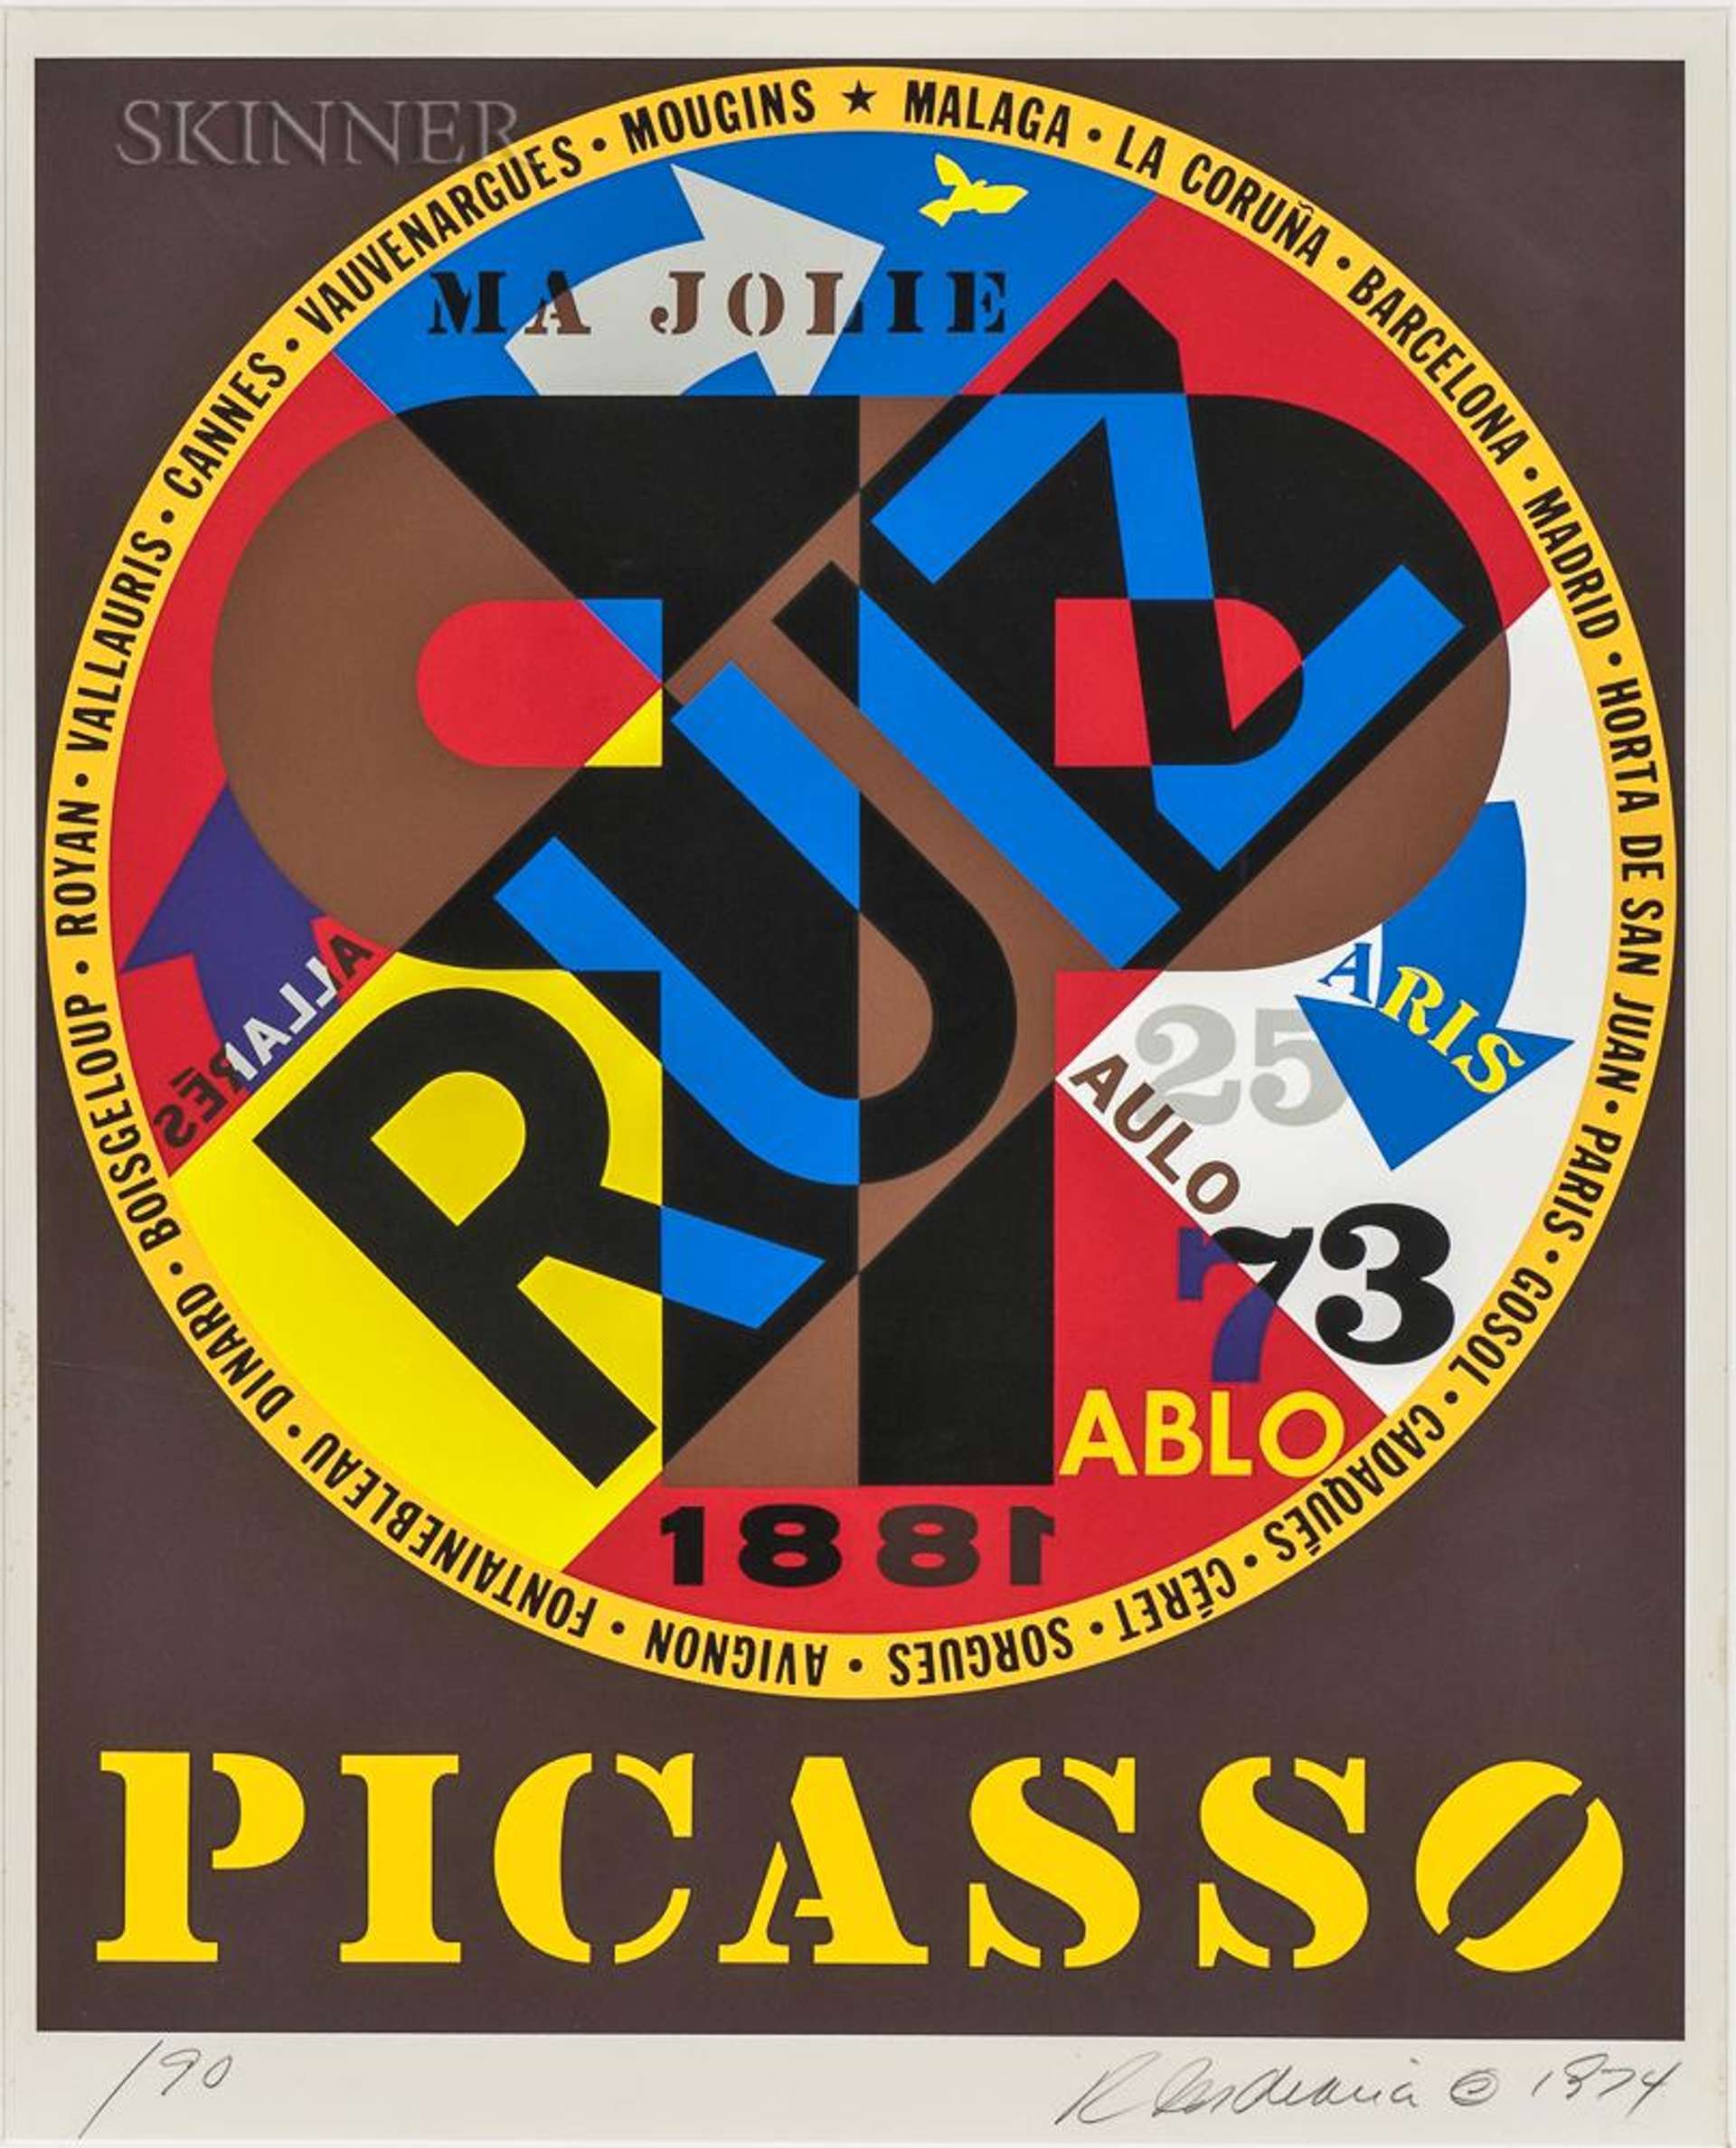 Picasso (yellow) - Signed Print by Robert Indiana 1974 - MyArtBroker